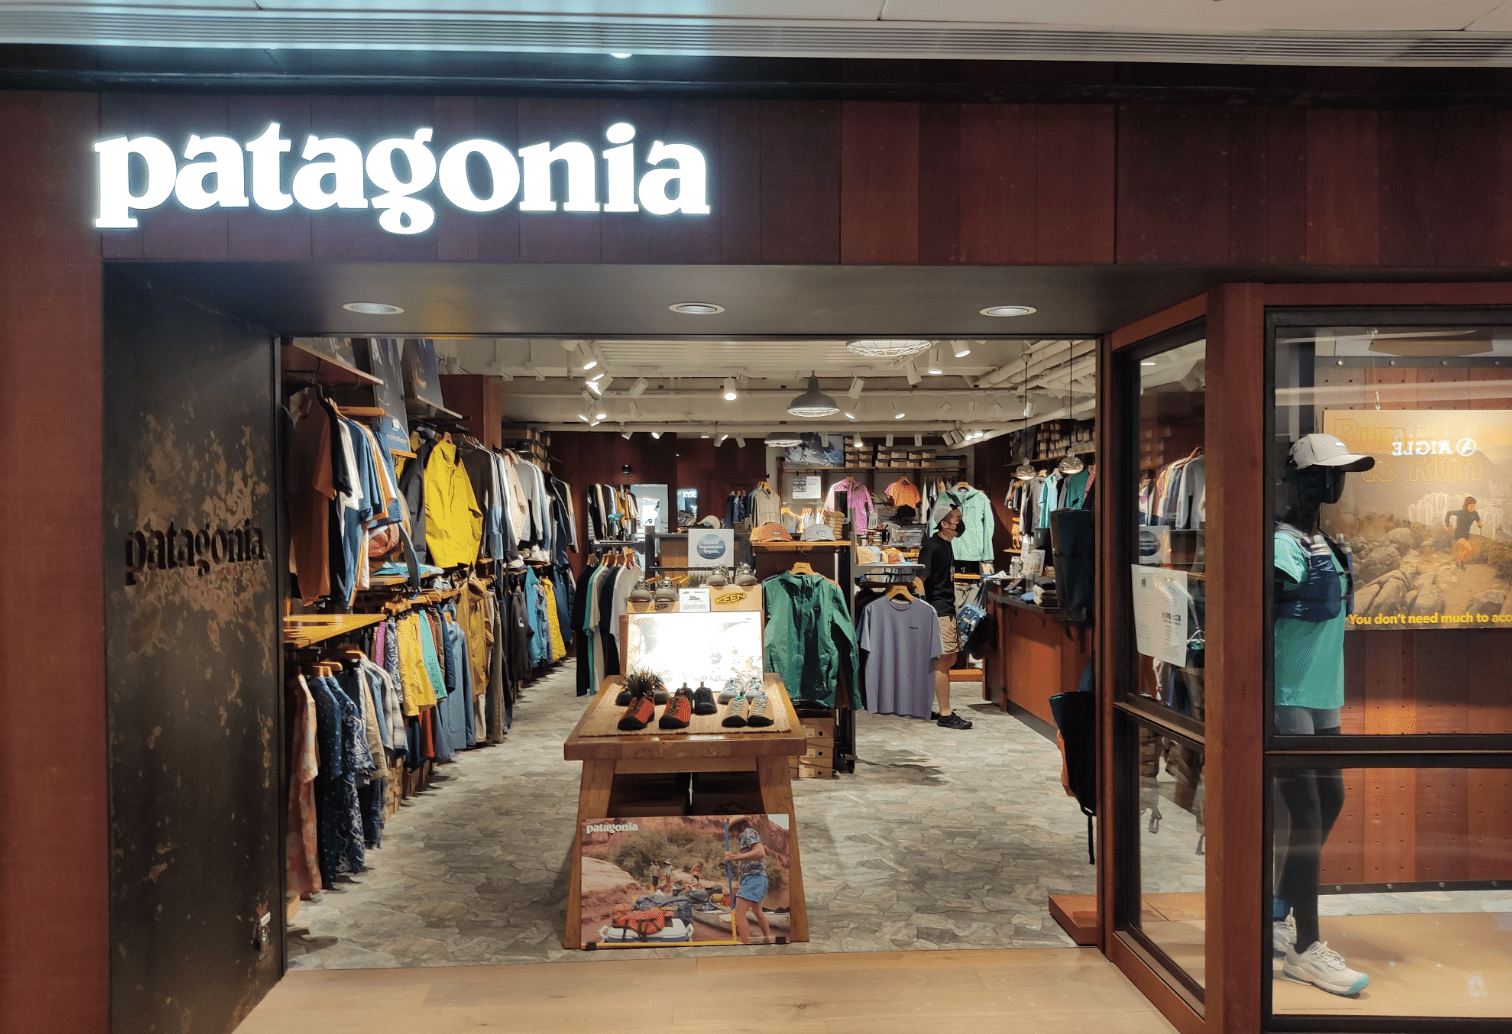 Patagonia made headlines when Chouinard announced that he was transferring 98 percent of the family-owned company